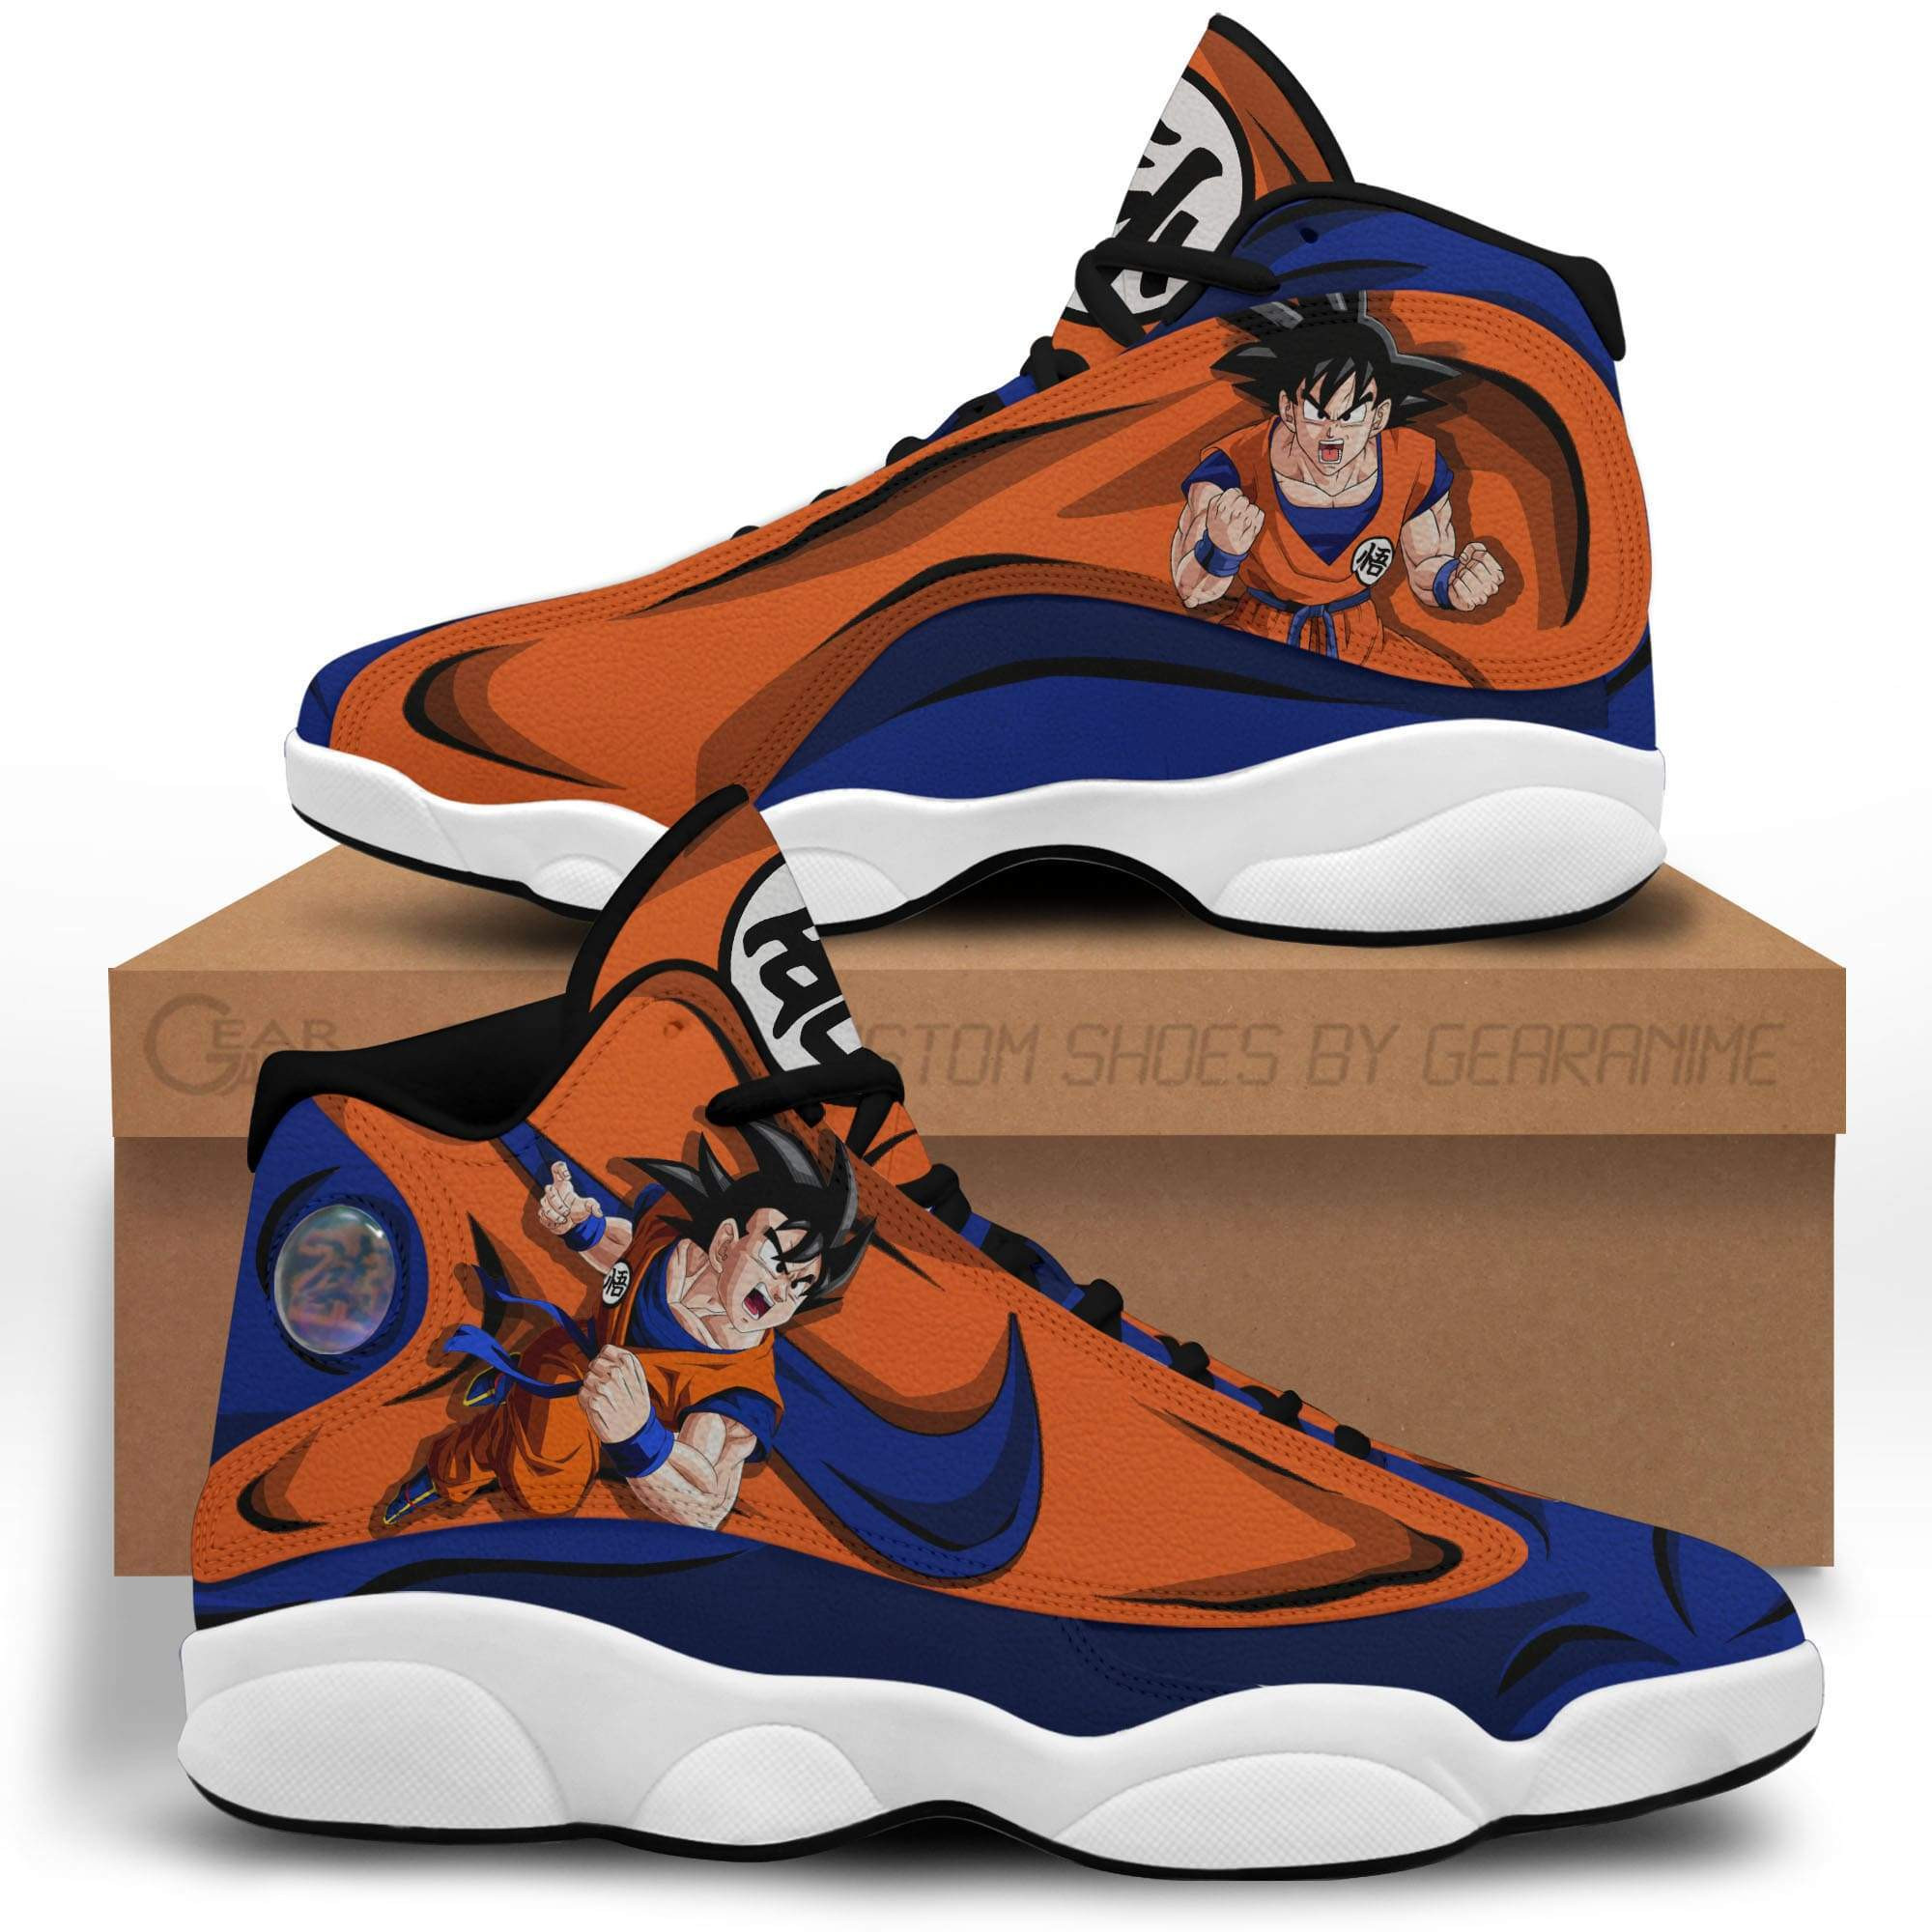 These Sneakers are a must-have for any Anime fan 95